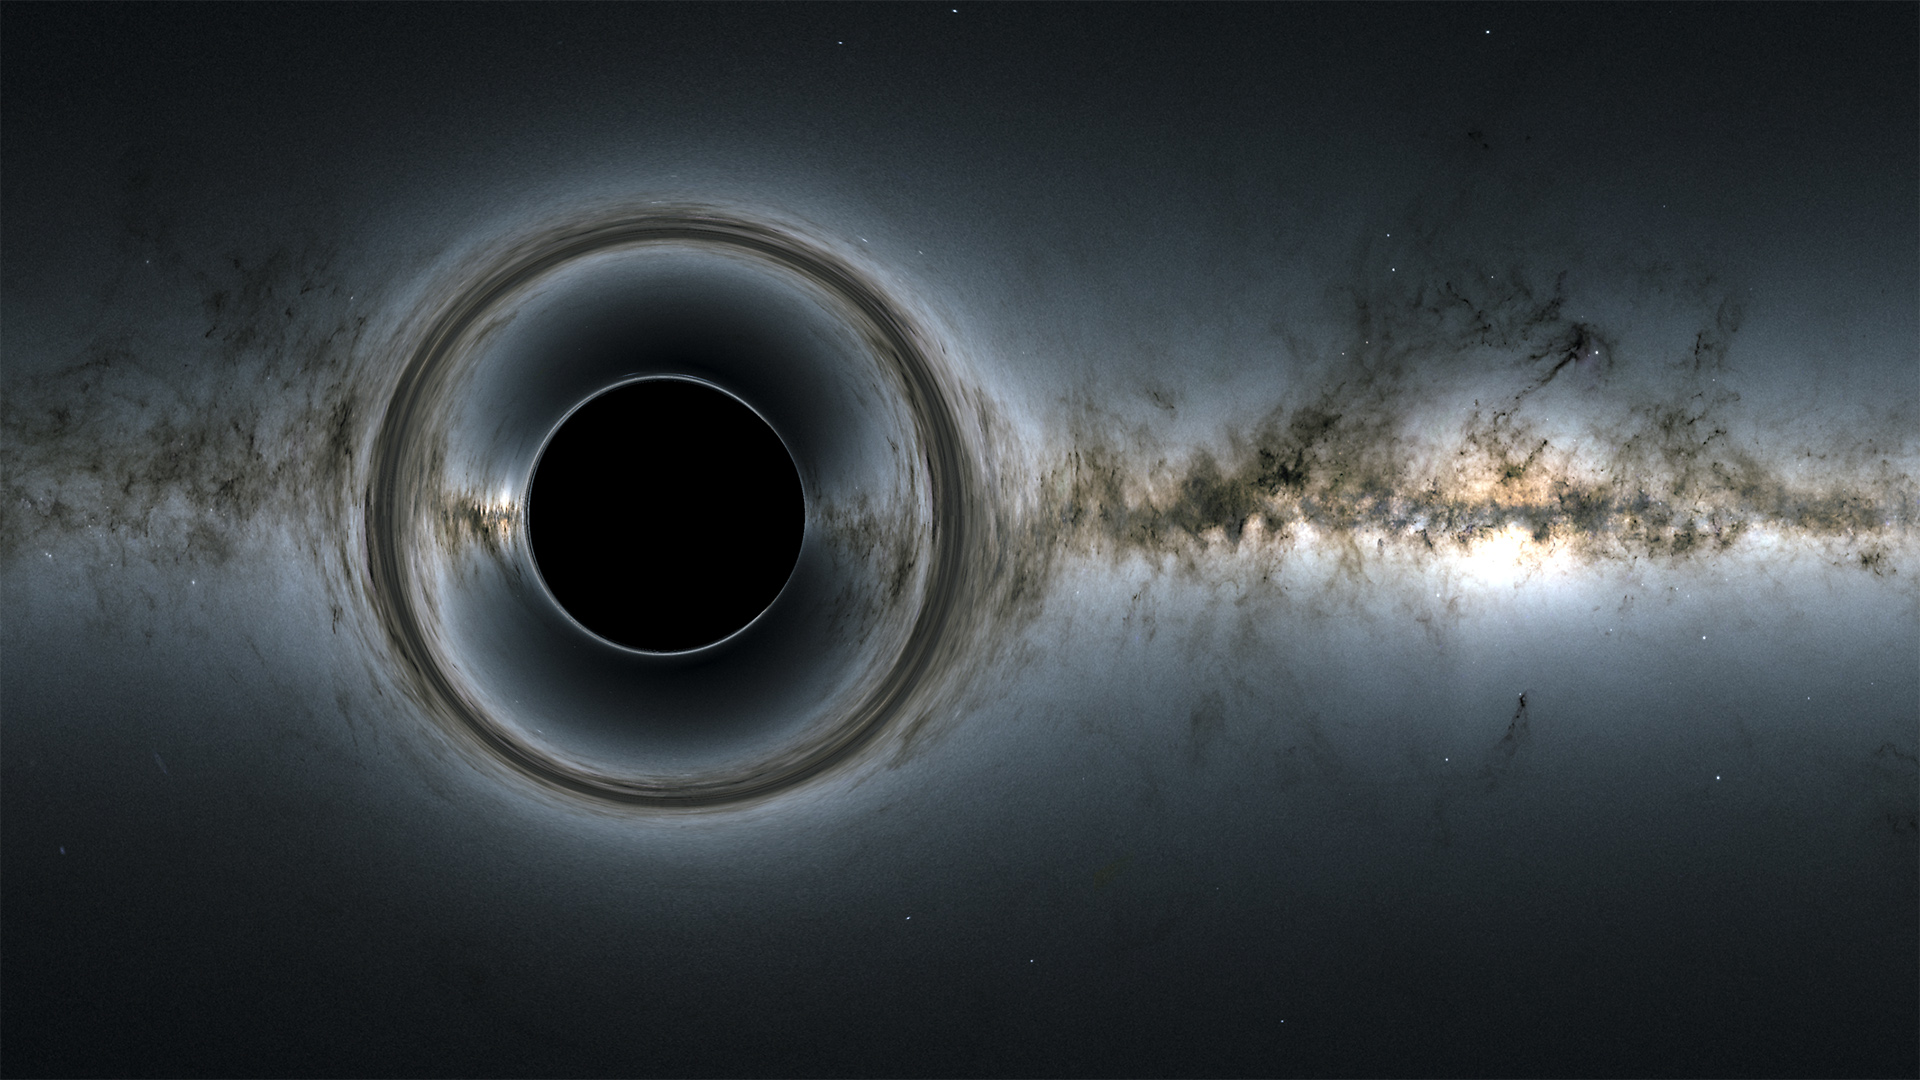 Artist's illustration showing a large black circular void to the left side of the image, in the background are many stars, dust clouds and gas.